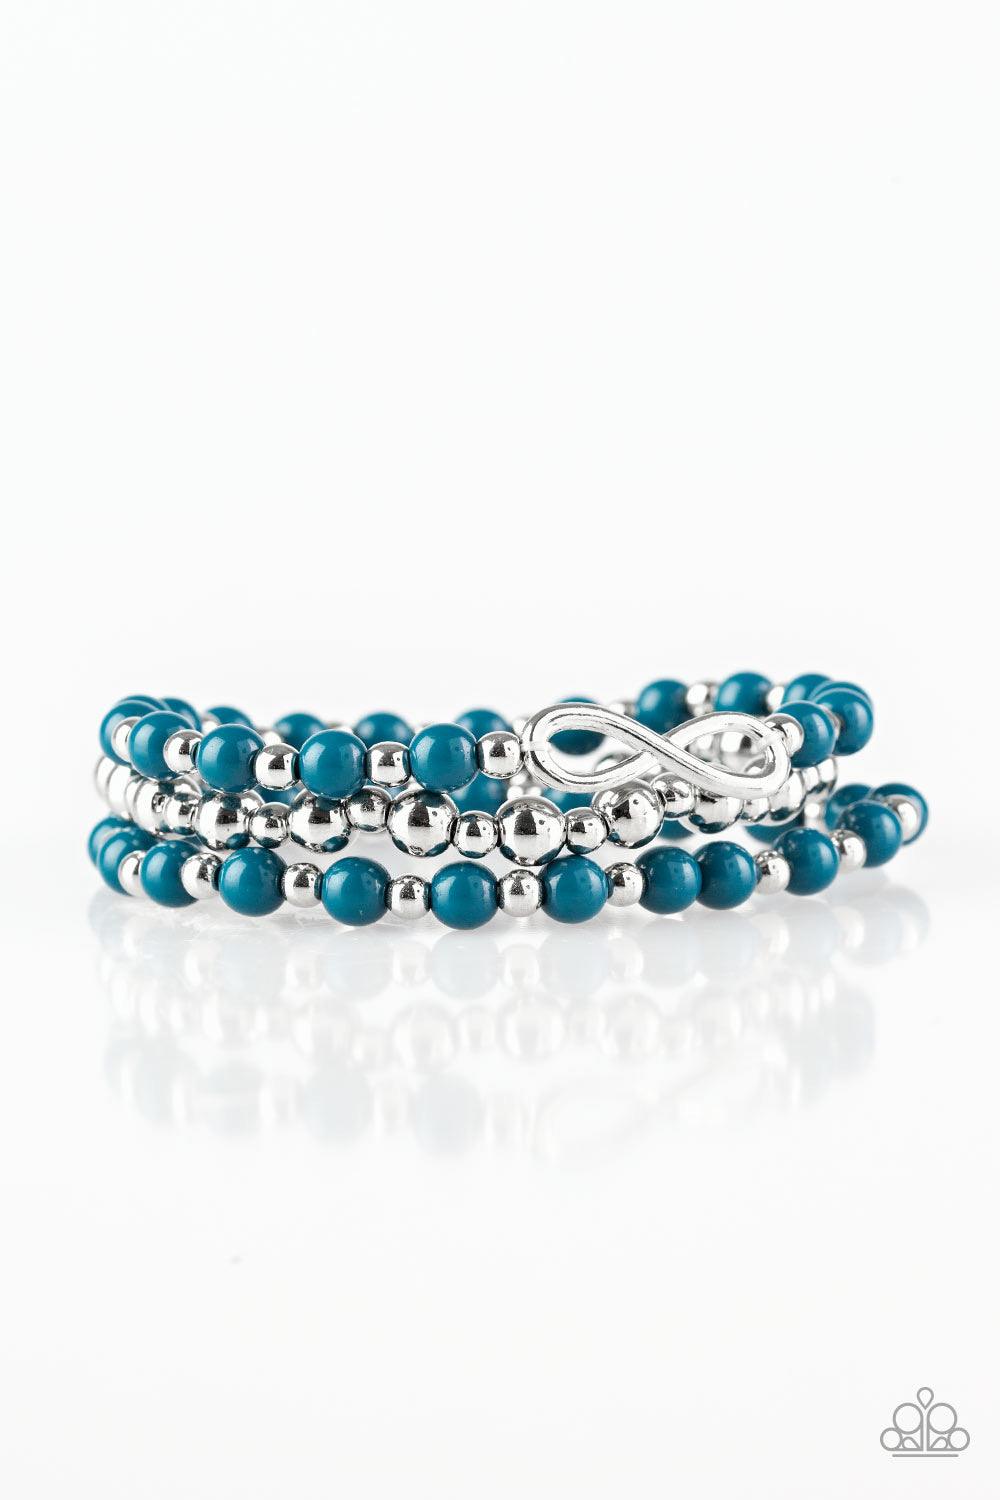 Paparazzi Accessories Immeasurably Infinite -Blue Refreshing blue and shiny silver beads are threaded along stretchy bands, creating colorful layers around the wrist. A dainty silver infinity charm adorns one strand for a whimsical finish. Sold as one set